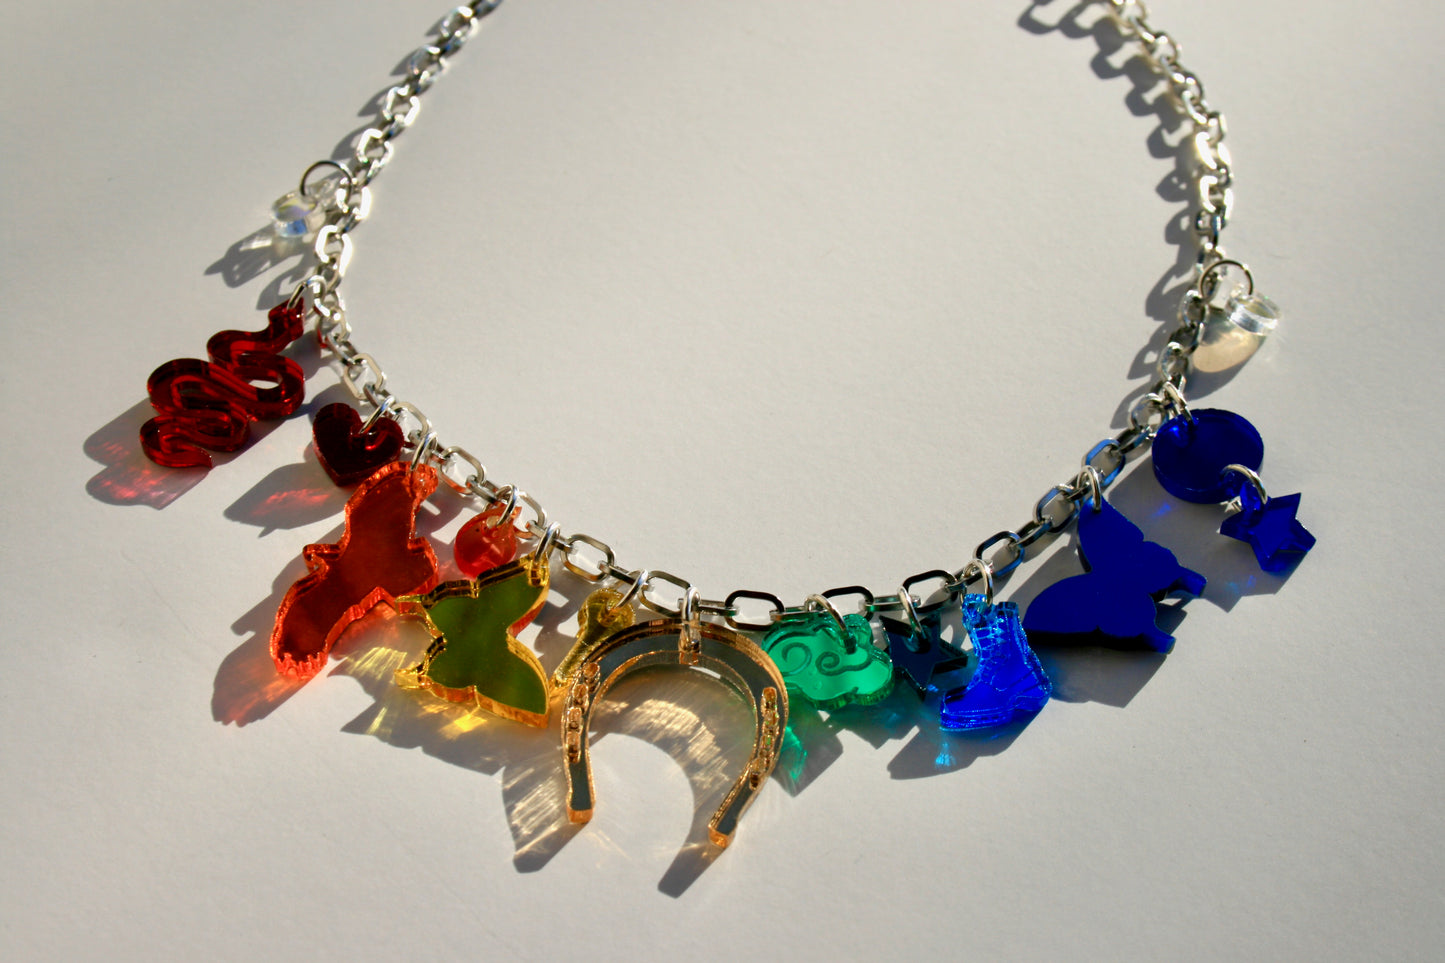 Rainbow Charm Necklace - Reflective OOAK One of a Kind Detailed